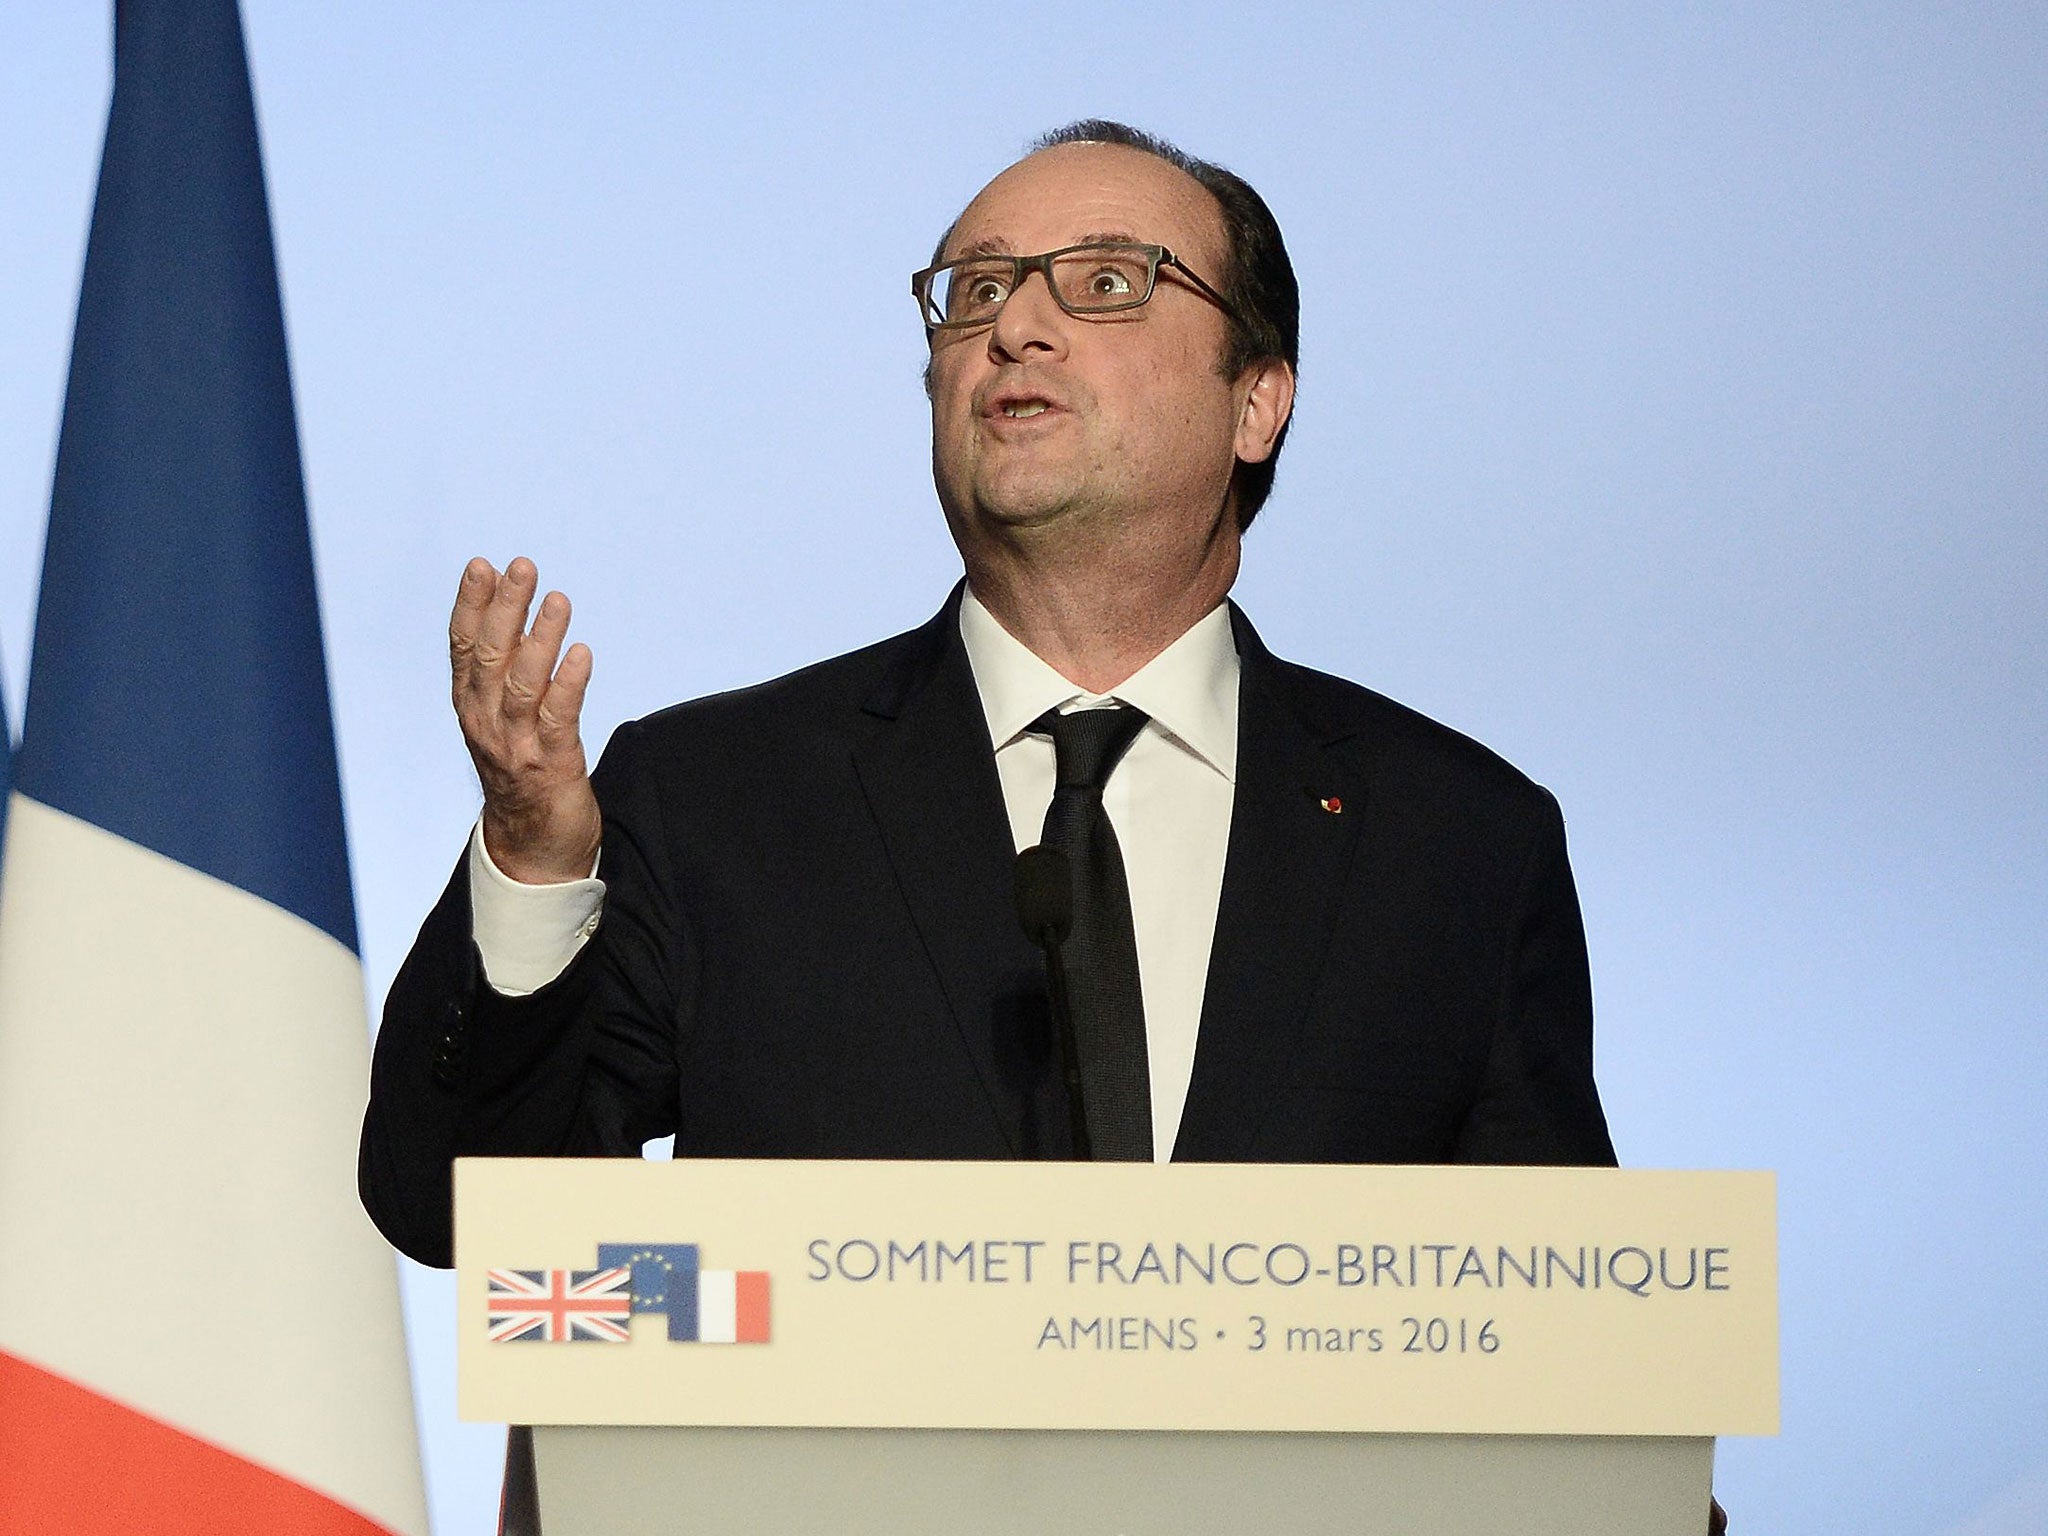 French President Francois Hollande gives a press conference at the Musee de Picardie in Amiens, northern France, during the 34th Franco-British summit